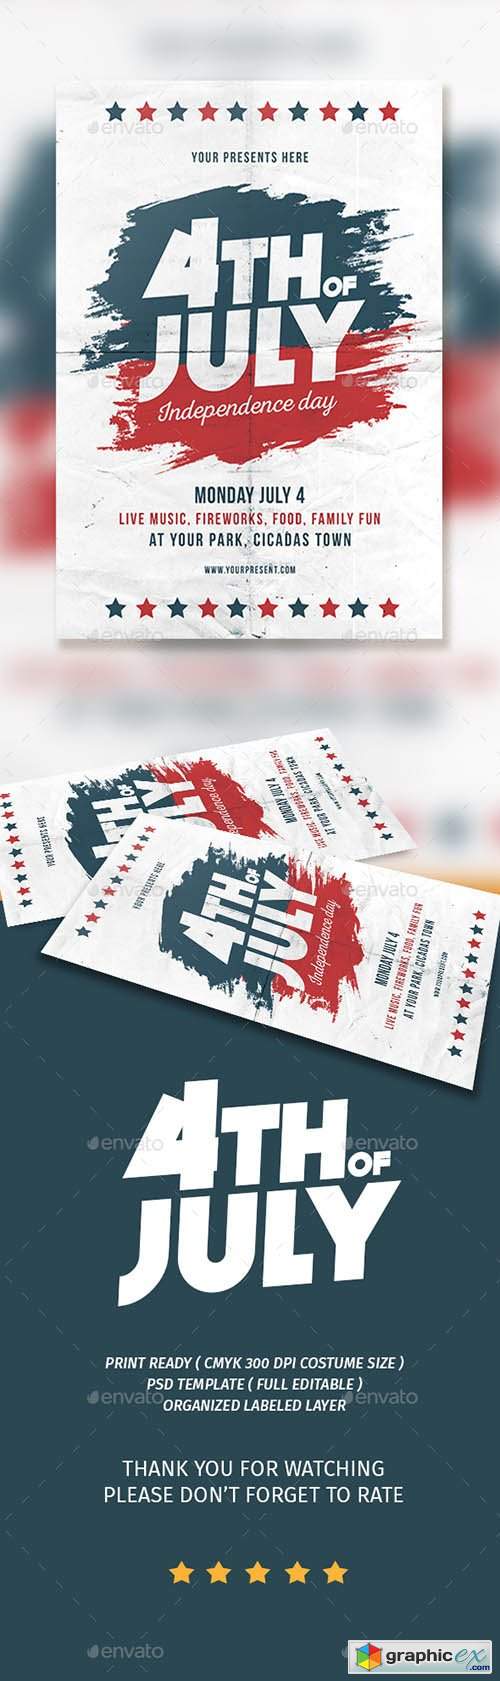 4th of JULY Flyer 16695233